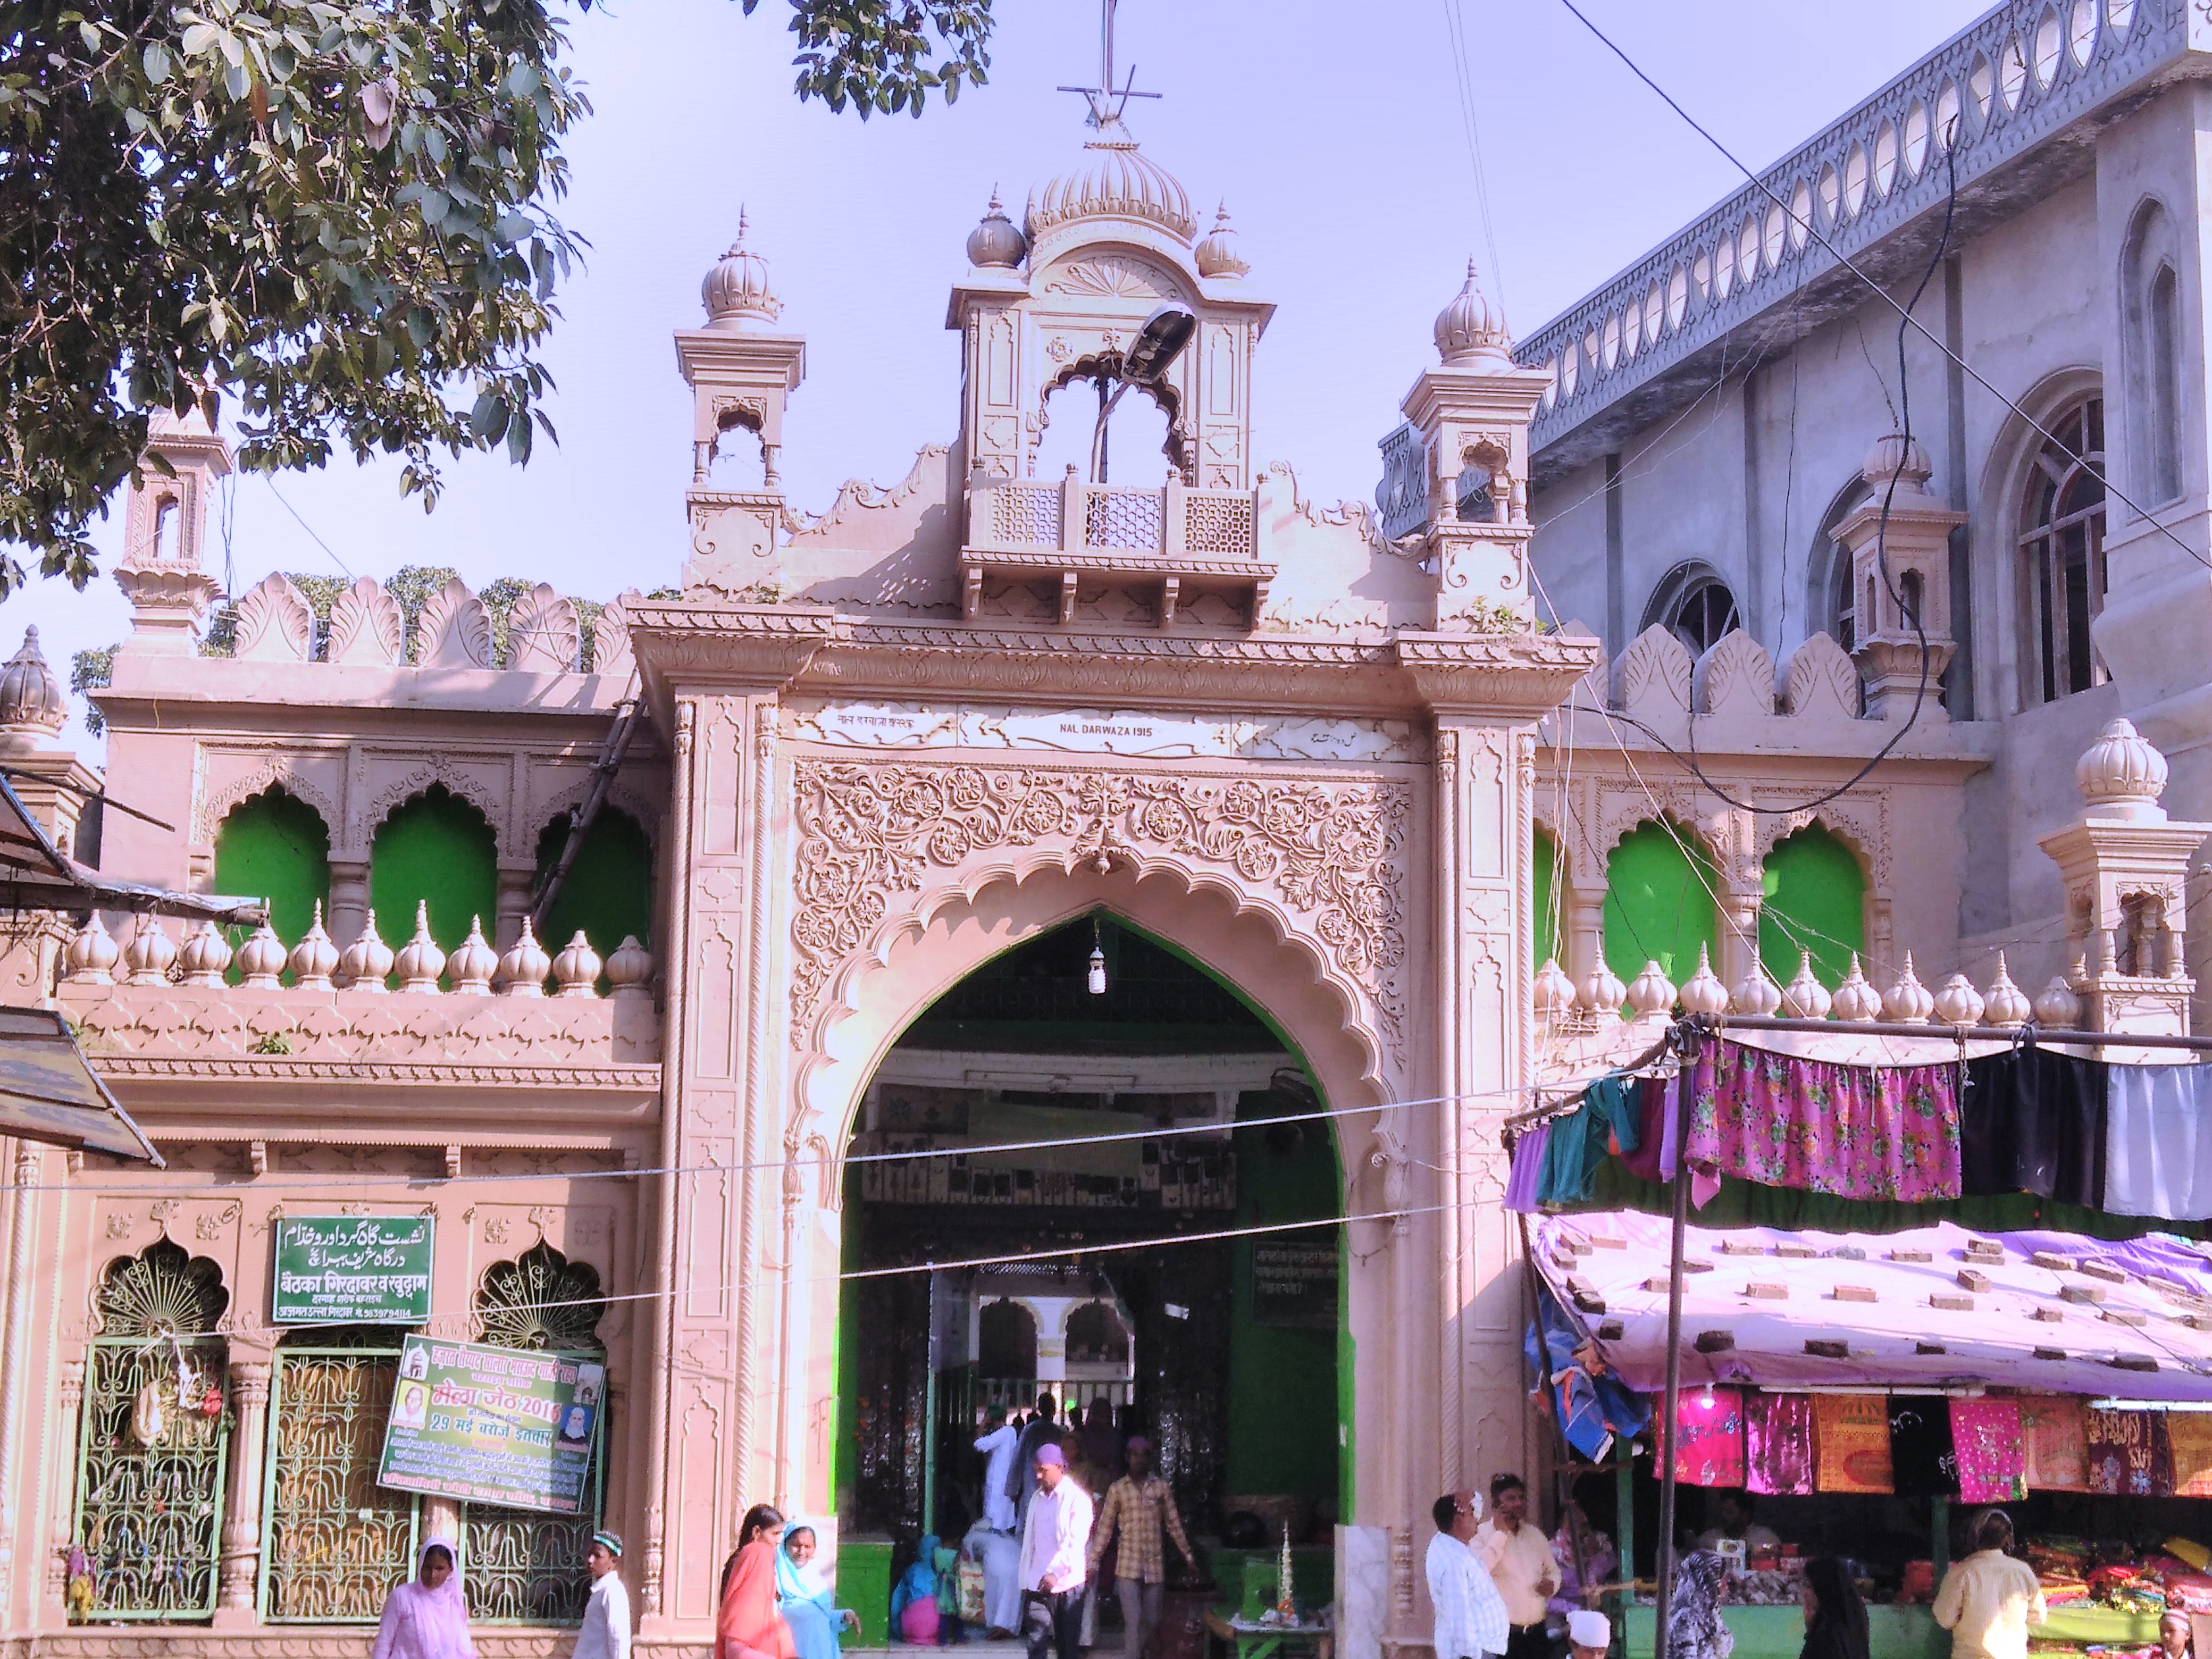 The large cream-colored gate of Salār Mas‘ūd’s shrine. People walk in, and there is a small shop in front